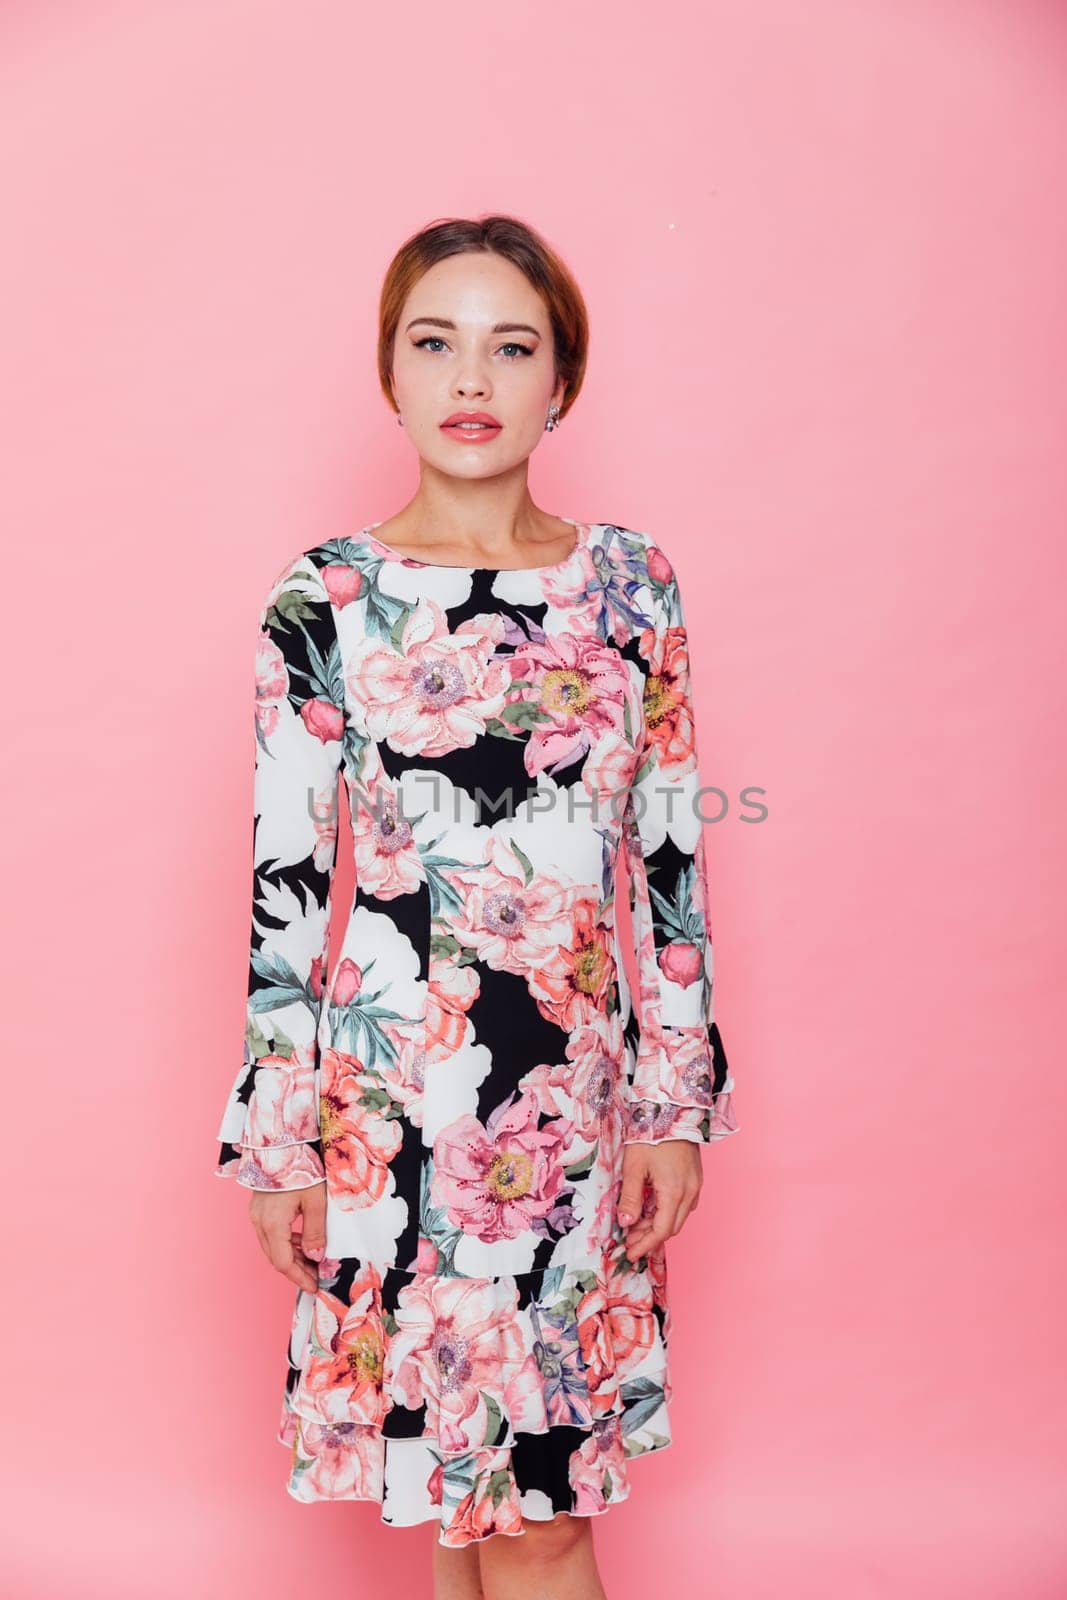 a beautiful woman in a floral dress poses on a pink background by Simakov